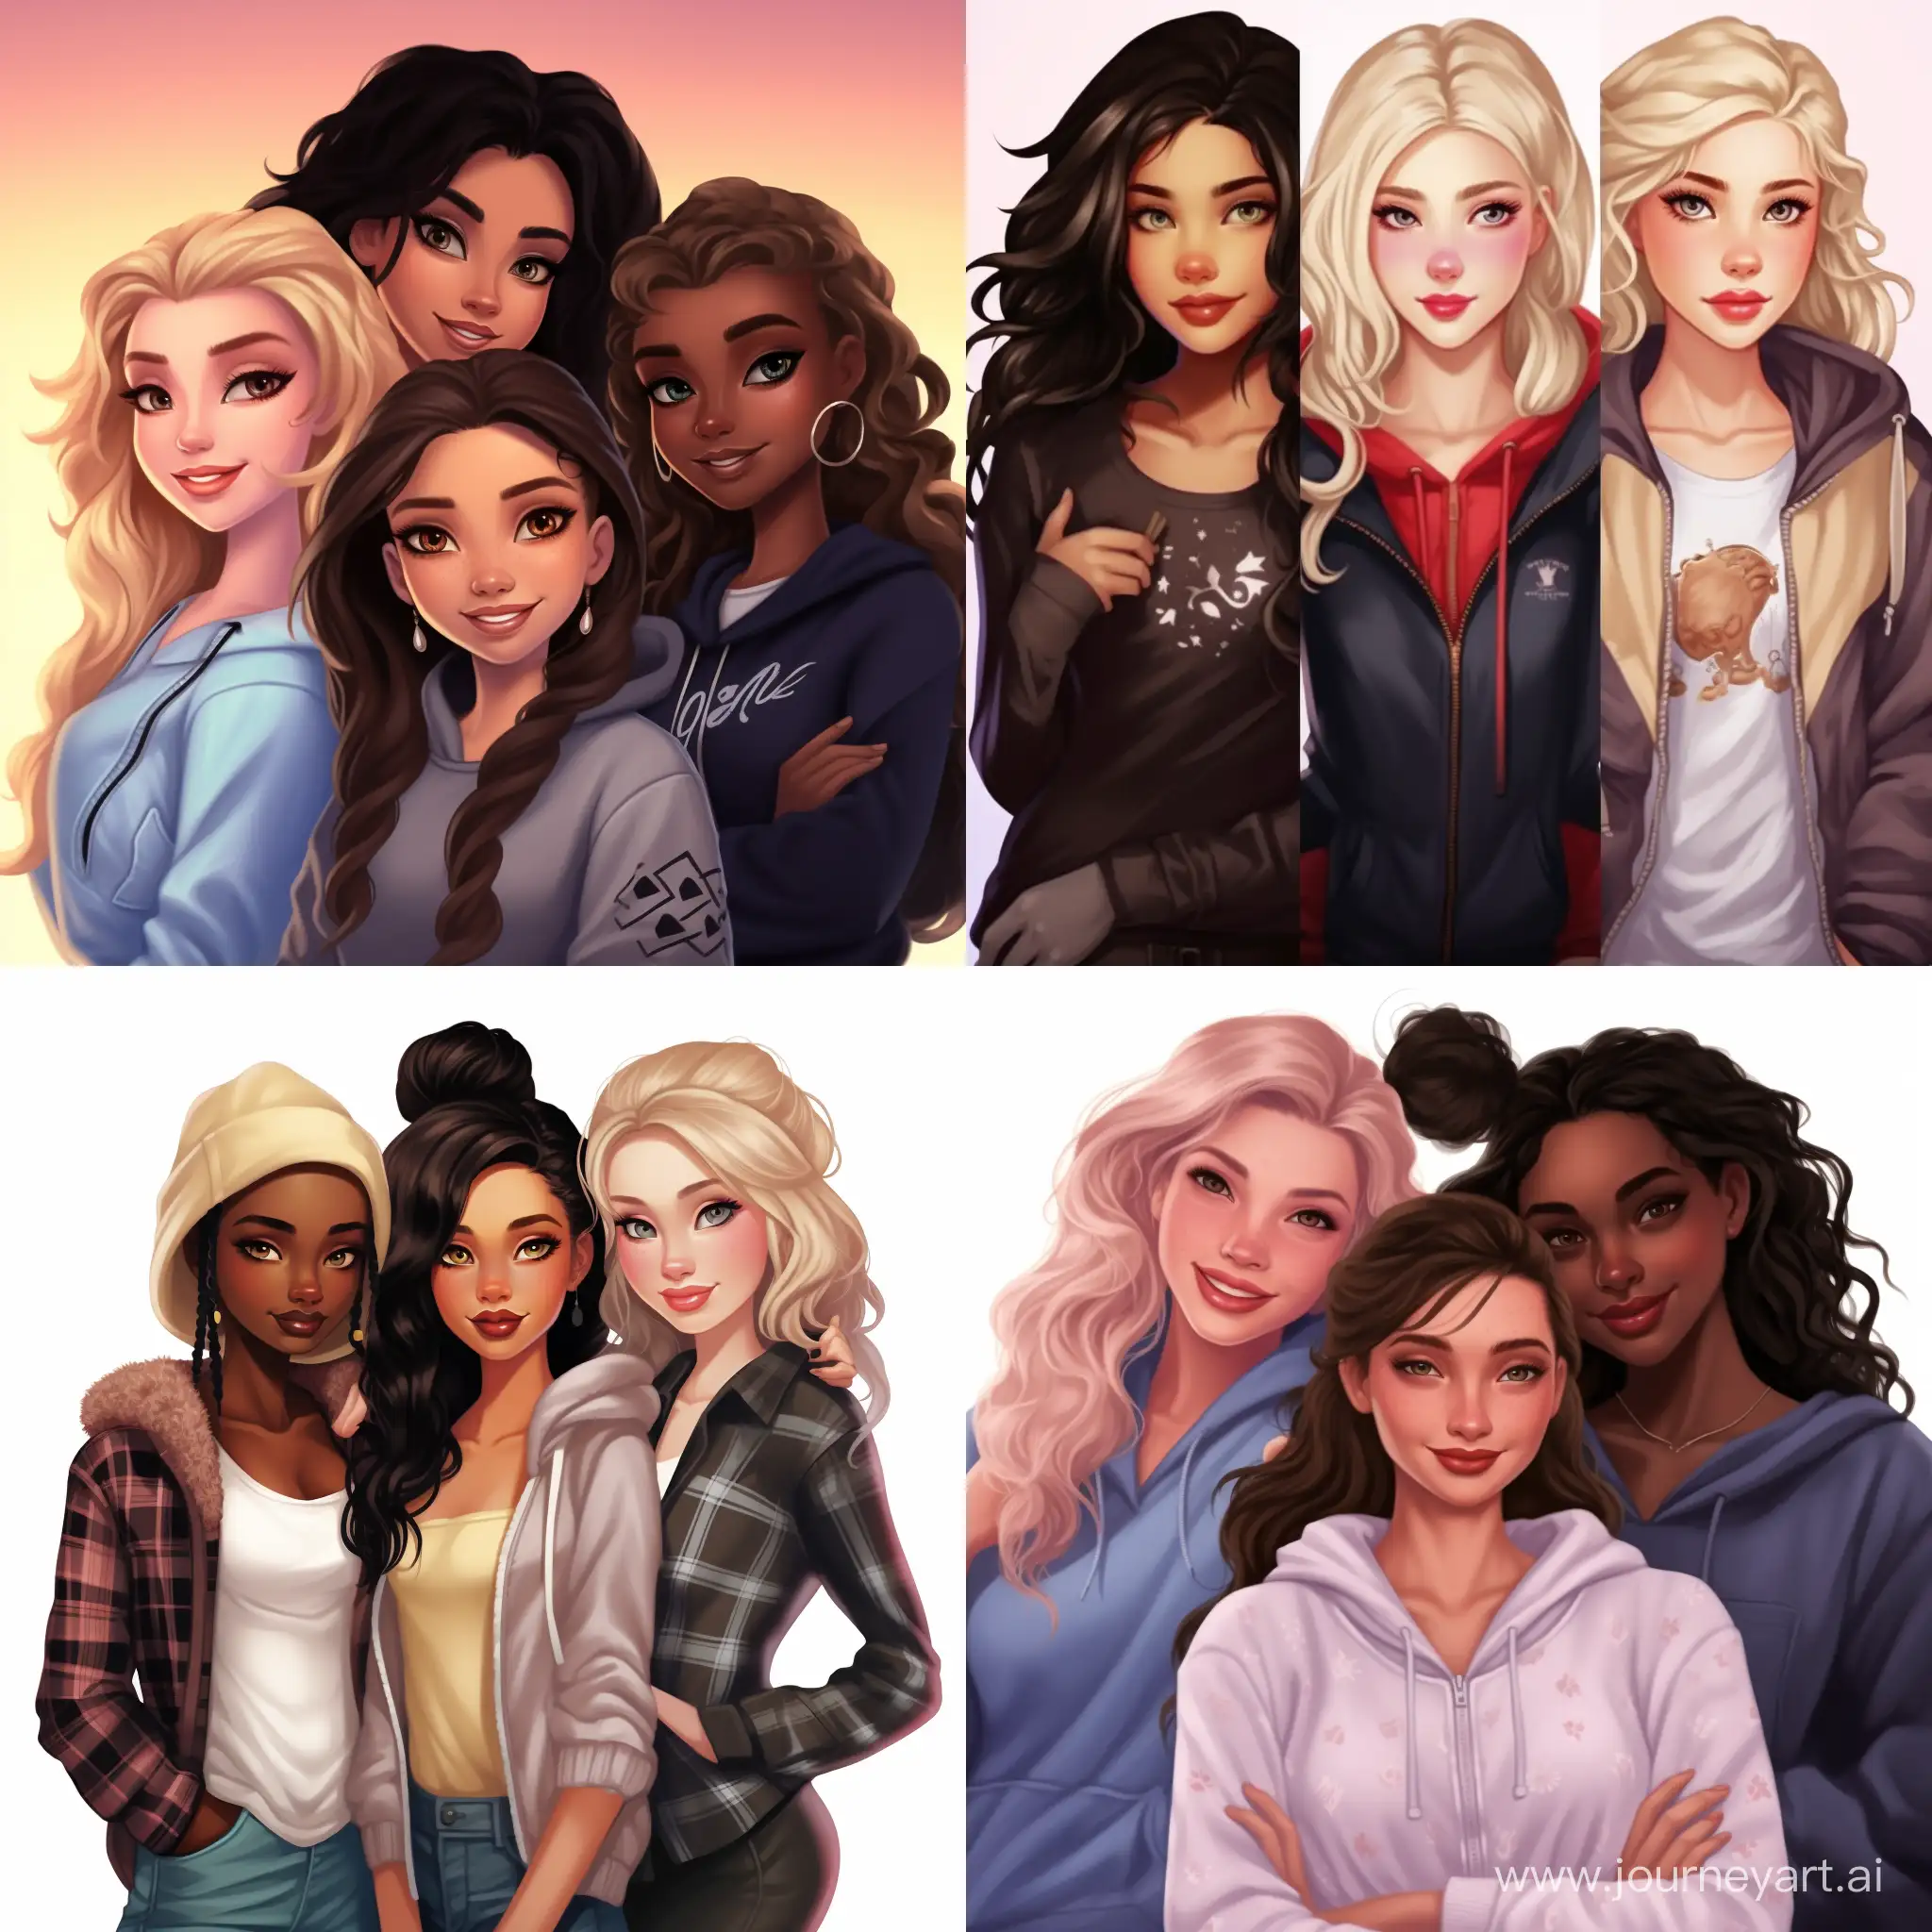 Diverse-Girl-Squad-DarkHaired-Beauty-Strict-Brunette-Cute-Little-Black-Woman-and-SoftSmiling-Blonde-in-HighQuality-Cartoon-Art